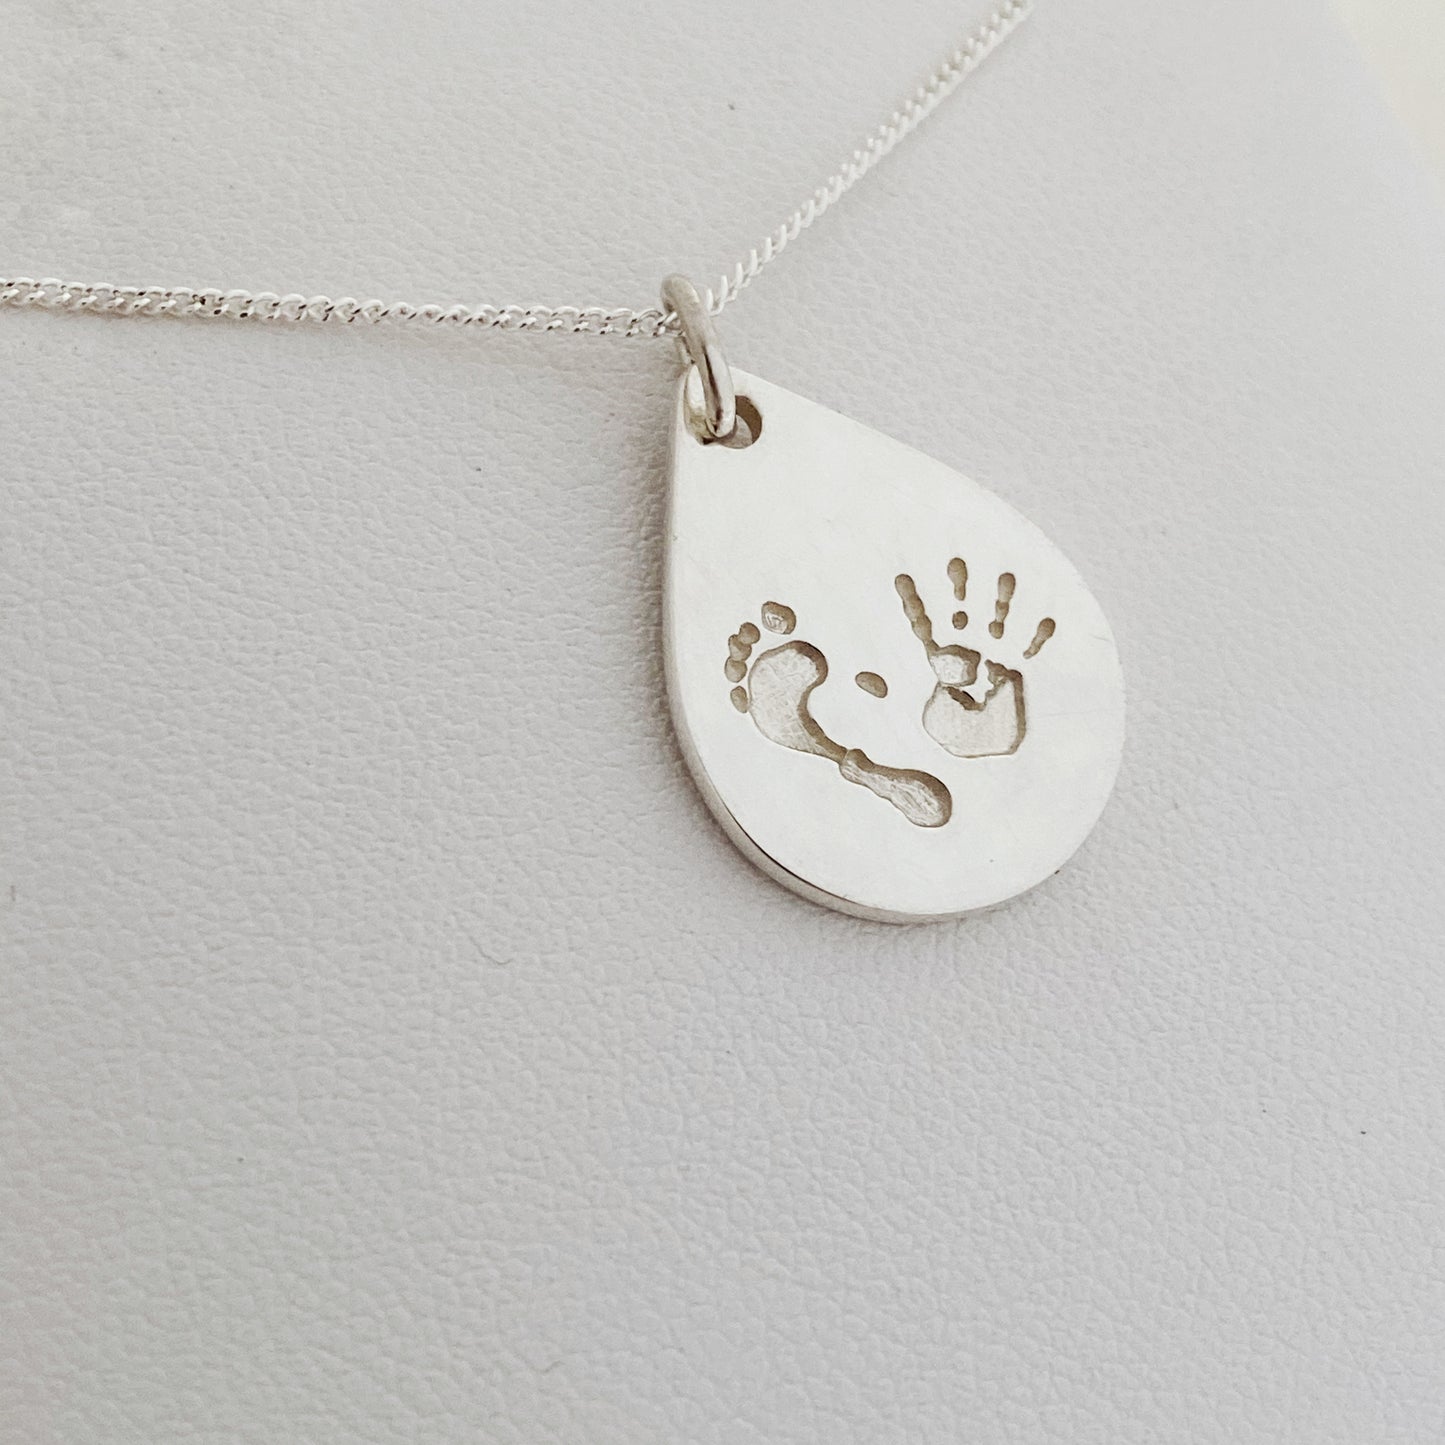 hand and footprint and fingerprinting jewellery, nz made from sterling silver